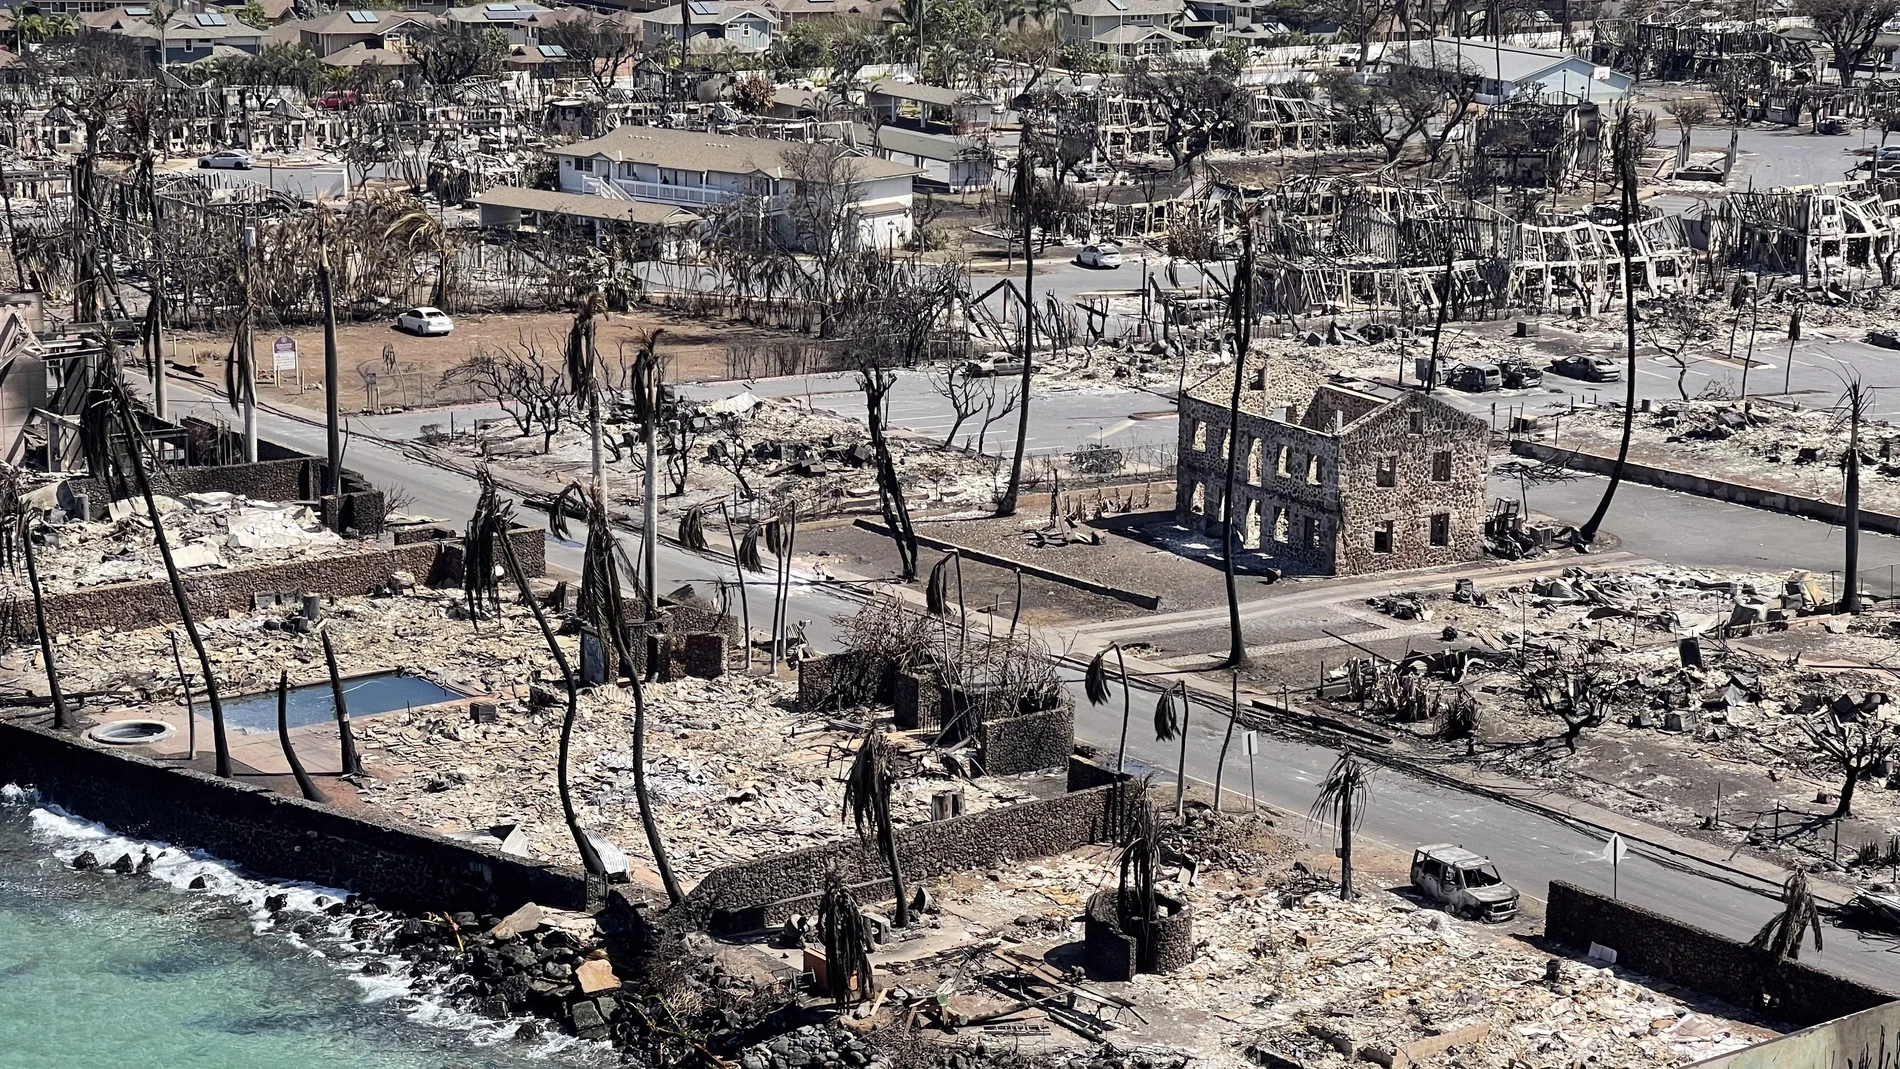 A handout photo made available by the Hawaii Department of Department of Land and Natural Resources shows an aerial view of the wildfire aftermath in Lahaina on Maui, 